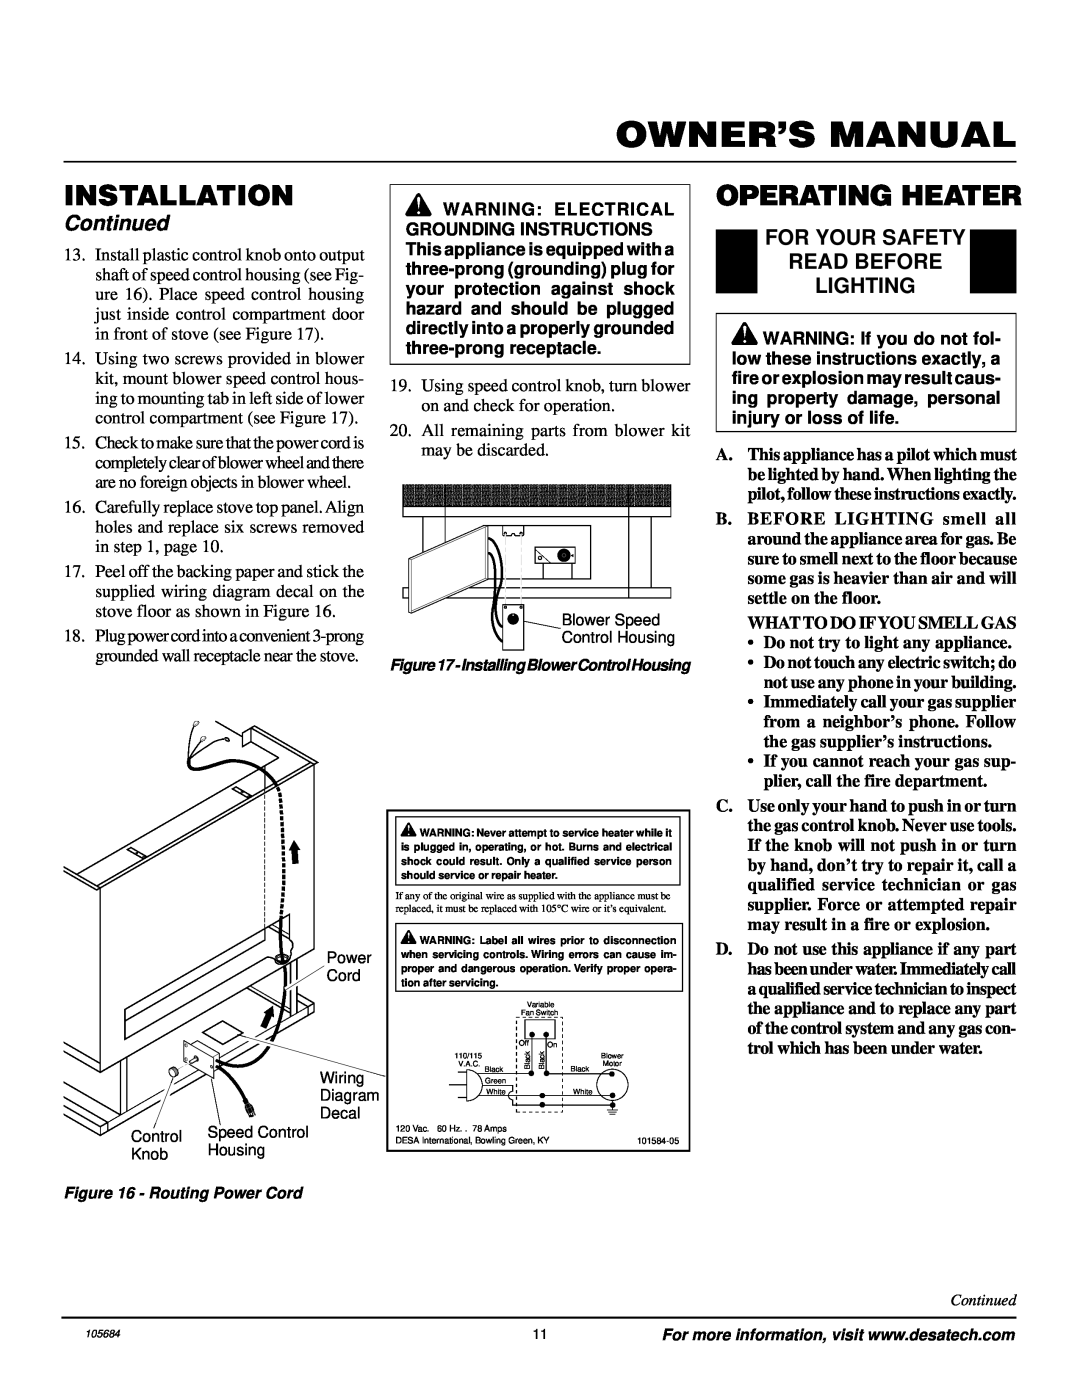 Desa Tech S26PT installation manual Operating Heater, For Your Safety Read Before Lighting, Installation, Continued 